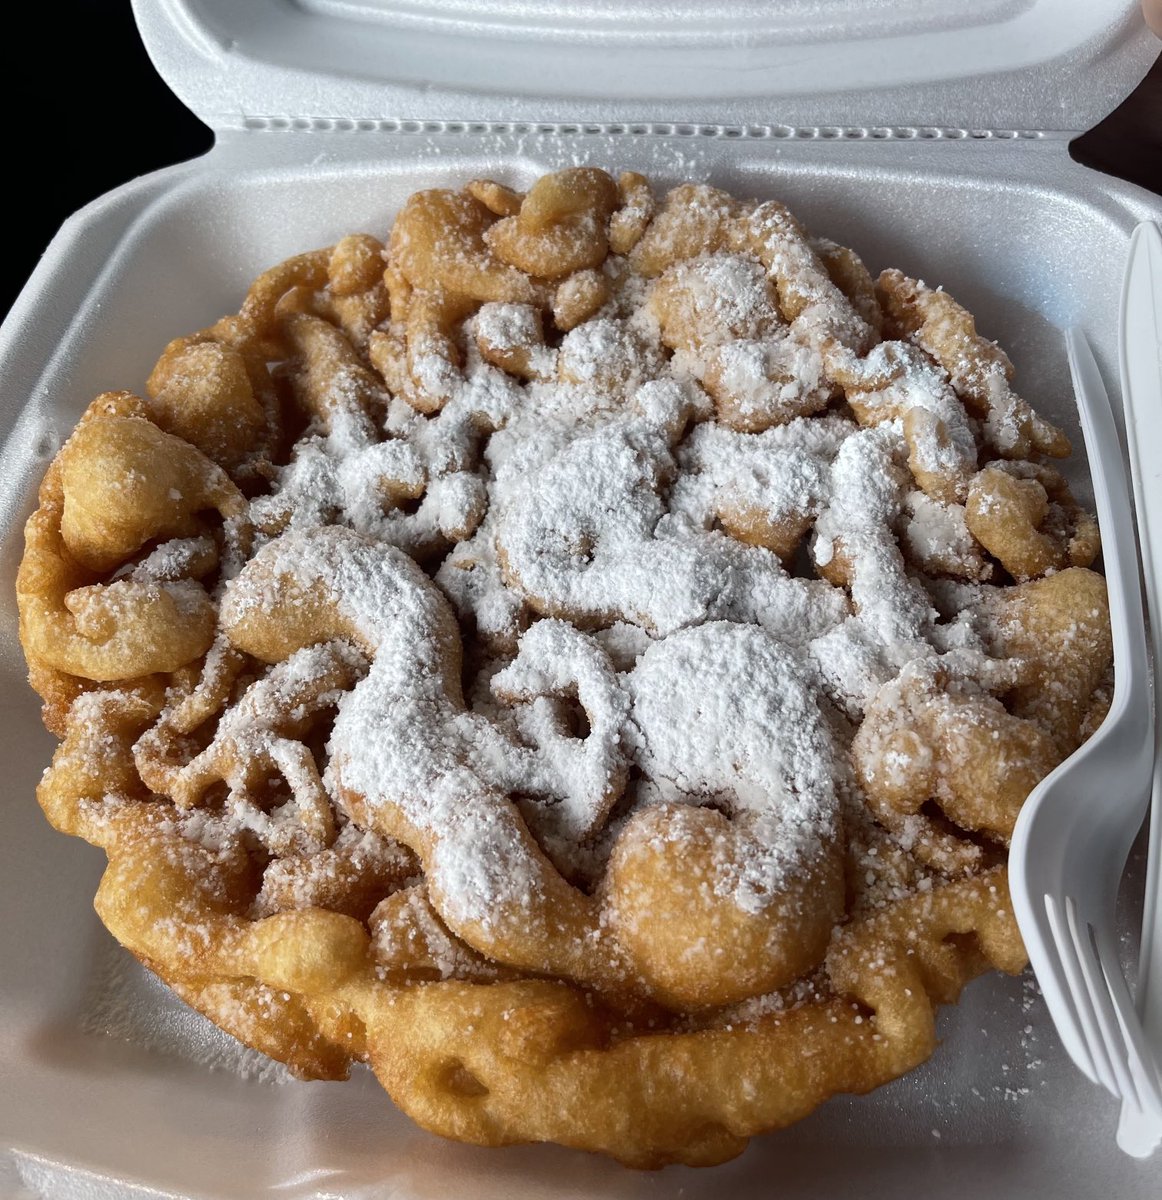 Yes! Got me a #funnelcake from #Xurro!